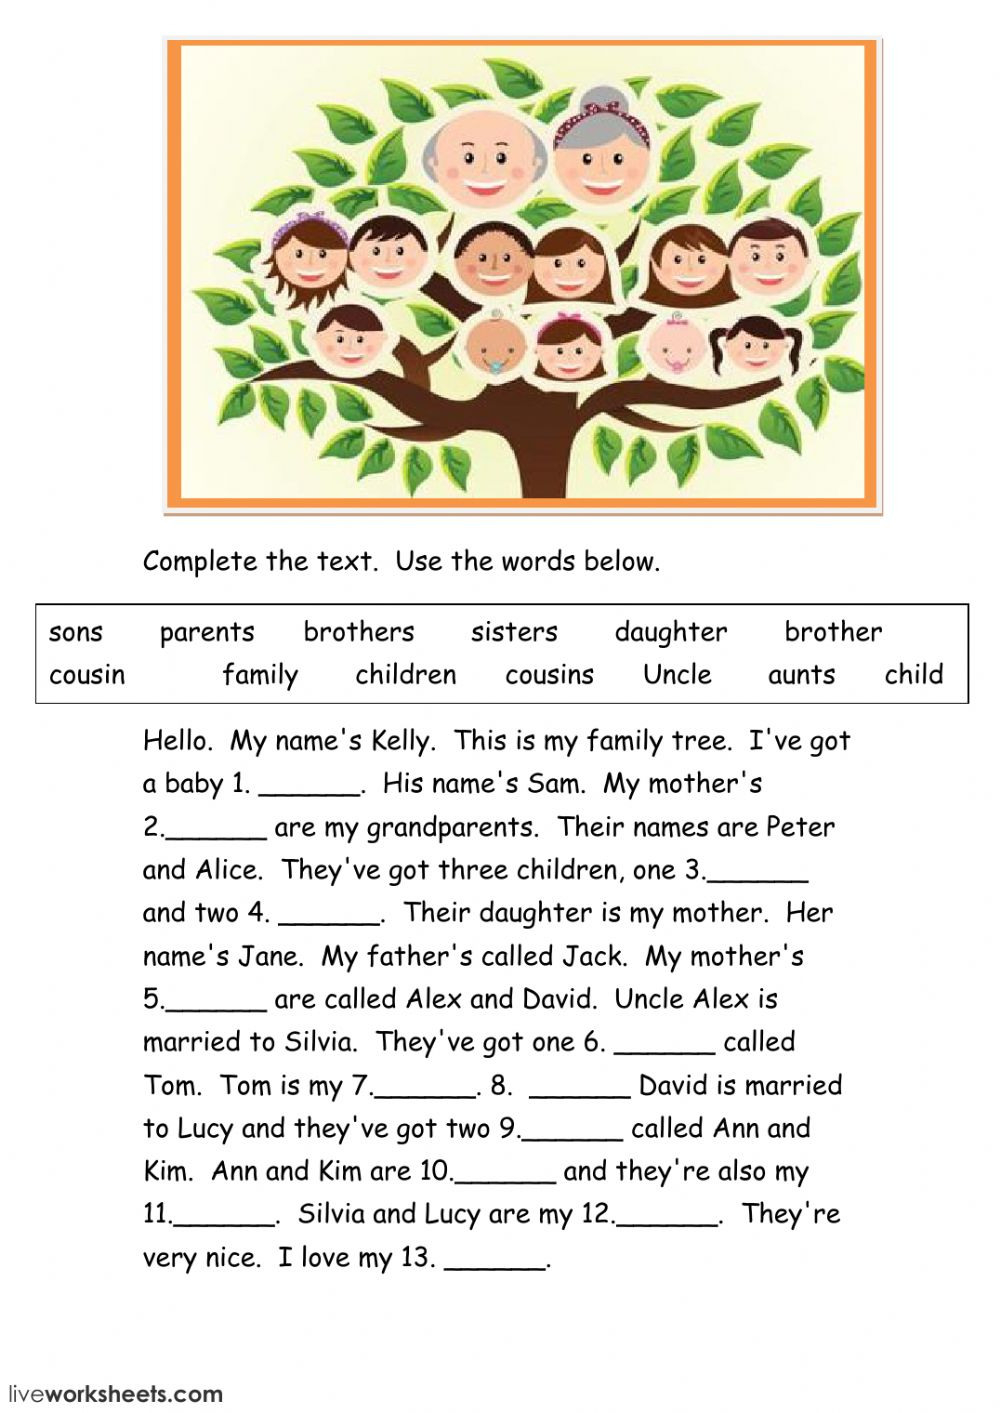 Spanish Family  Tree  Worksheet  Answers db excel com